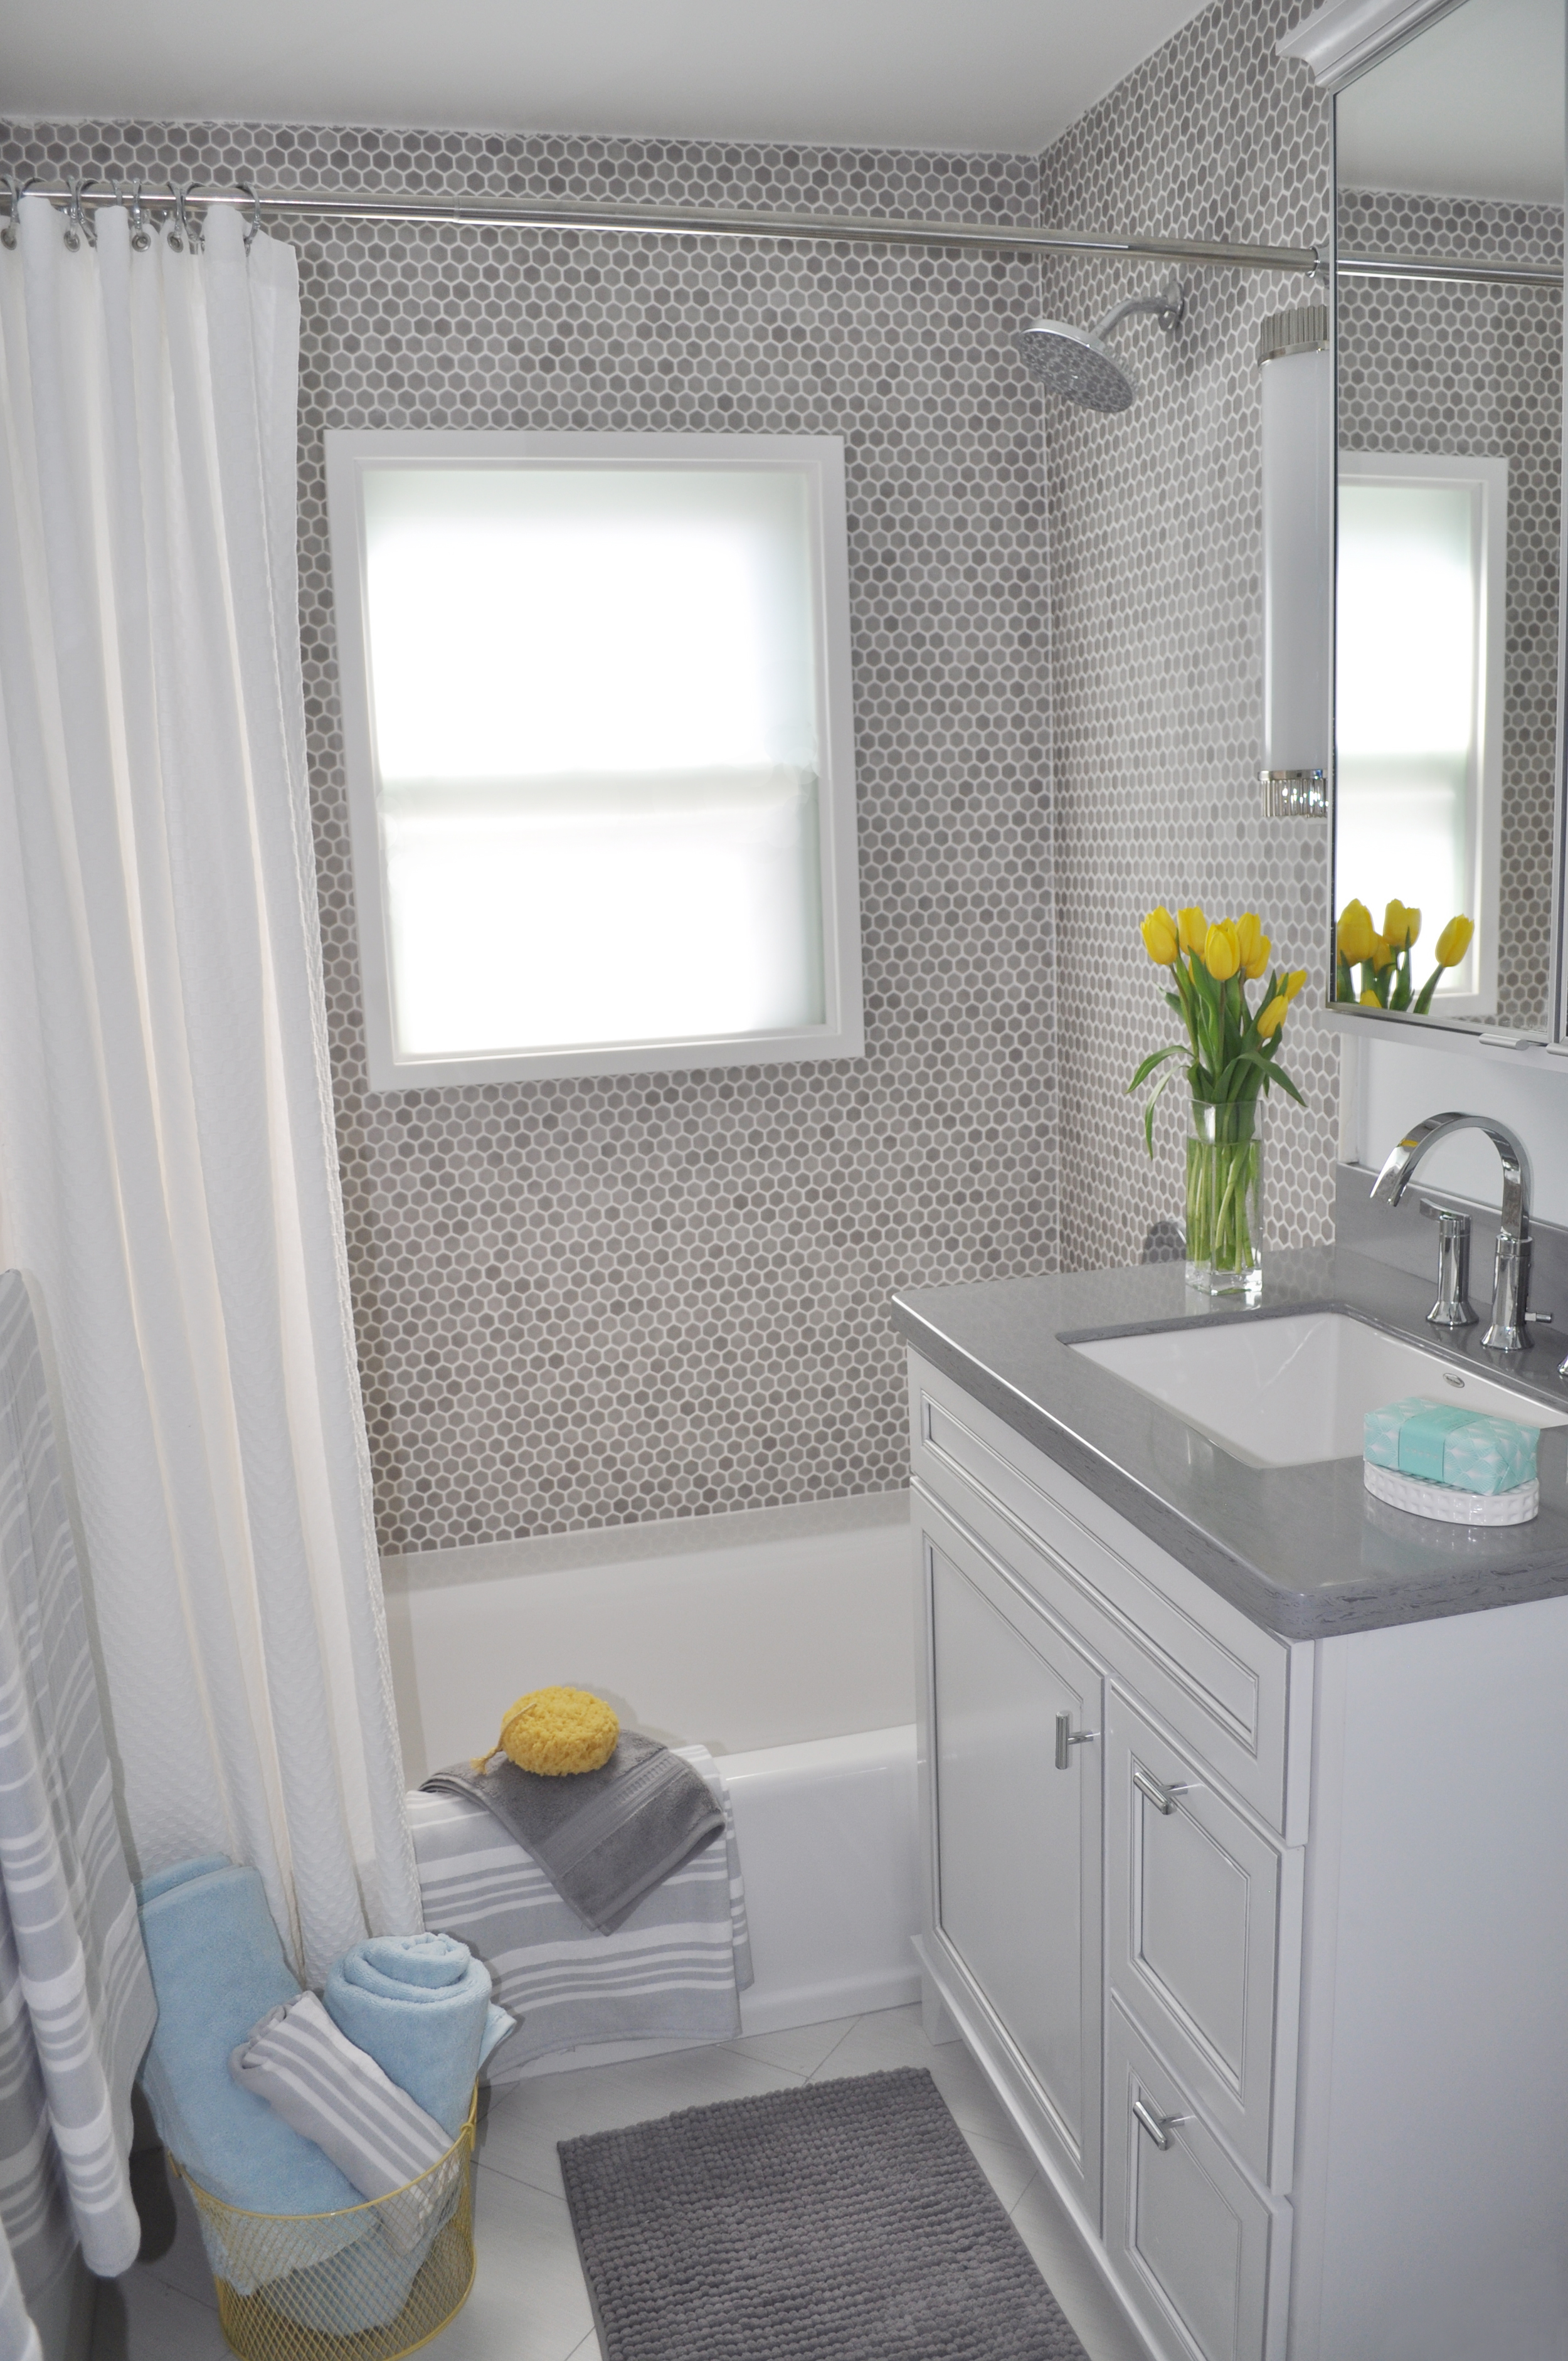 Kim Mitchell Production Designer_HGTV_Buying and Selling with The Property Brothers_Season 3_ Episode 316_Bathroom Renovation_Shoer Bath_Shower bath combination_Bathroom Design_Grey Bathroom.jpg